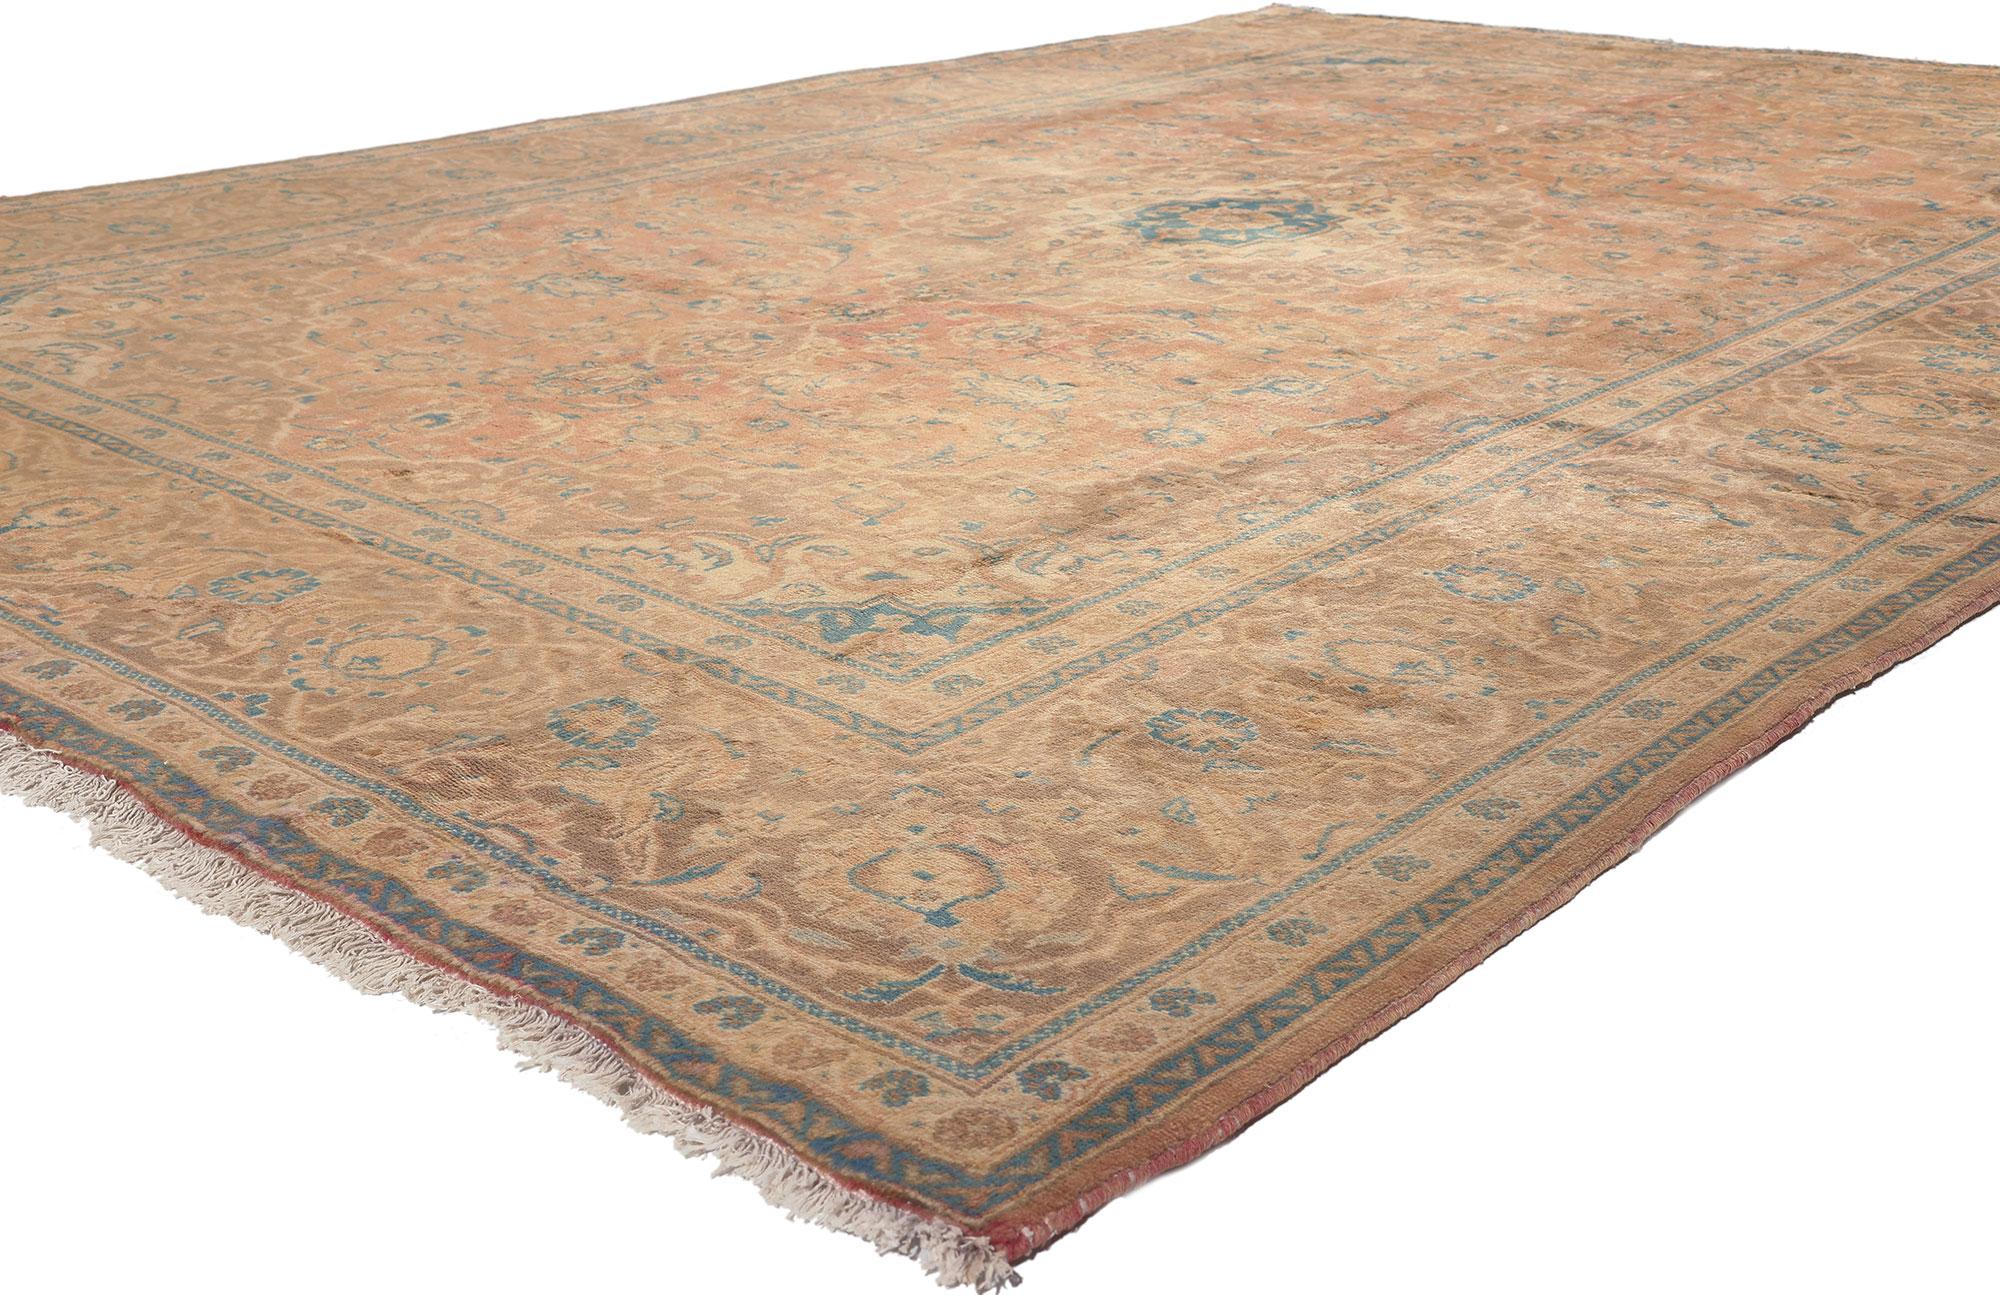 76457 Vintage Persian Yazd Rug, 08'00 x 11'03. 
Timeless appeal meets sunbaked elegance in this vintage Persian Yazd rug. The naturalistic botanical design uand rustic earth-tone colors woven into this piece work together creating a beautifully